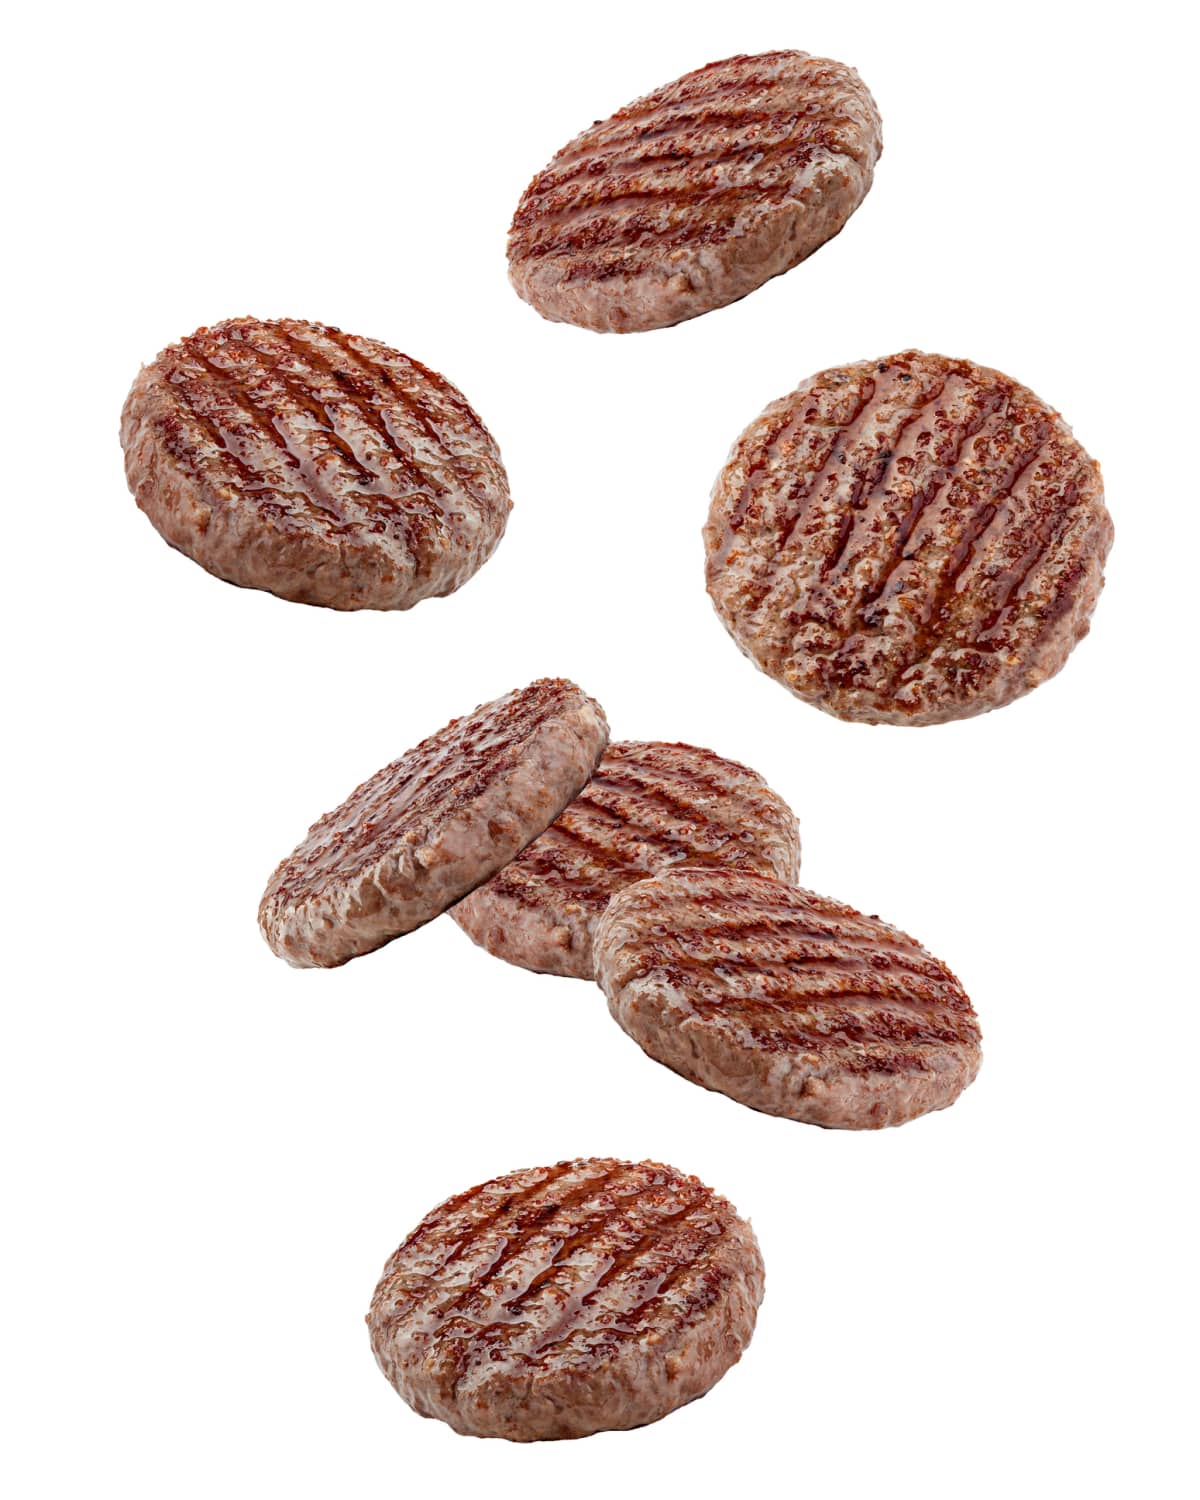 Fresh raw burger patties against a white background.